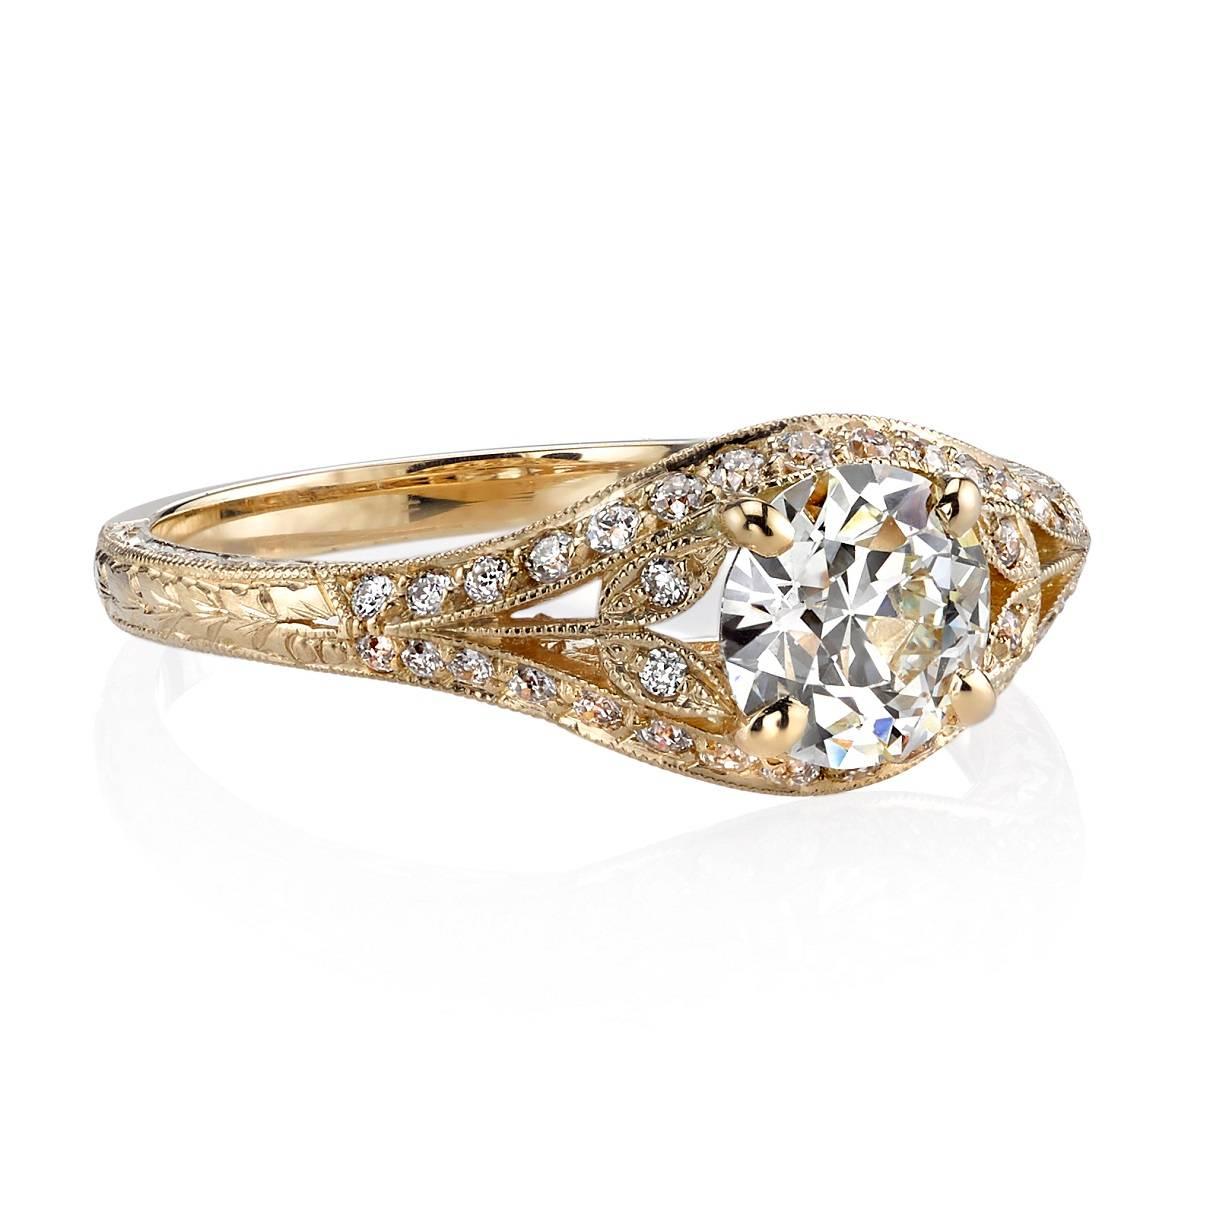 0.80ct L/VS1 old European cut diamond GIA certified and set in a handcrafted 18k yellow gold mounting.  A classic Edwardian design that features filigree, floral motifs, and hand engraving.